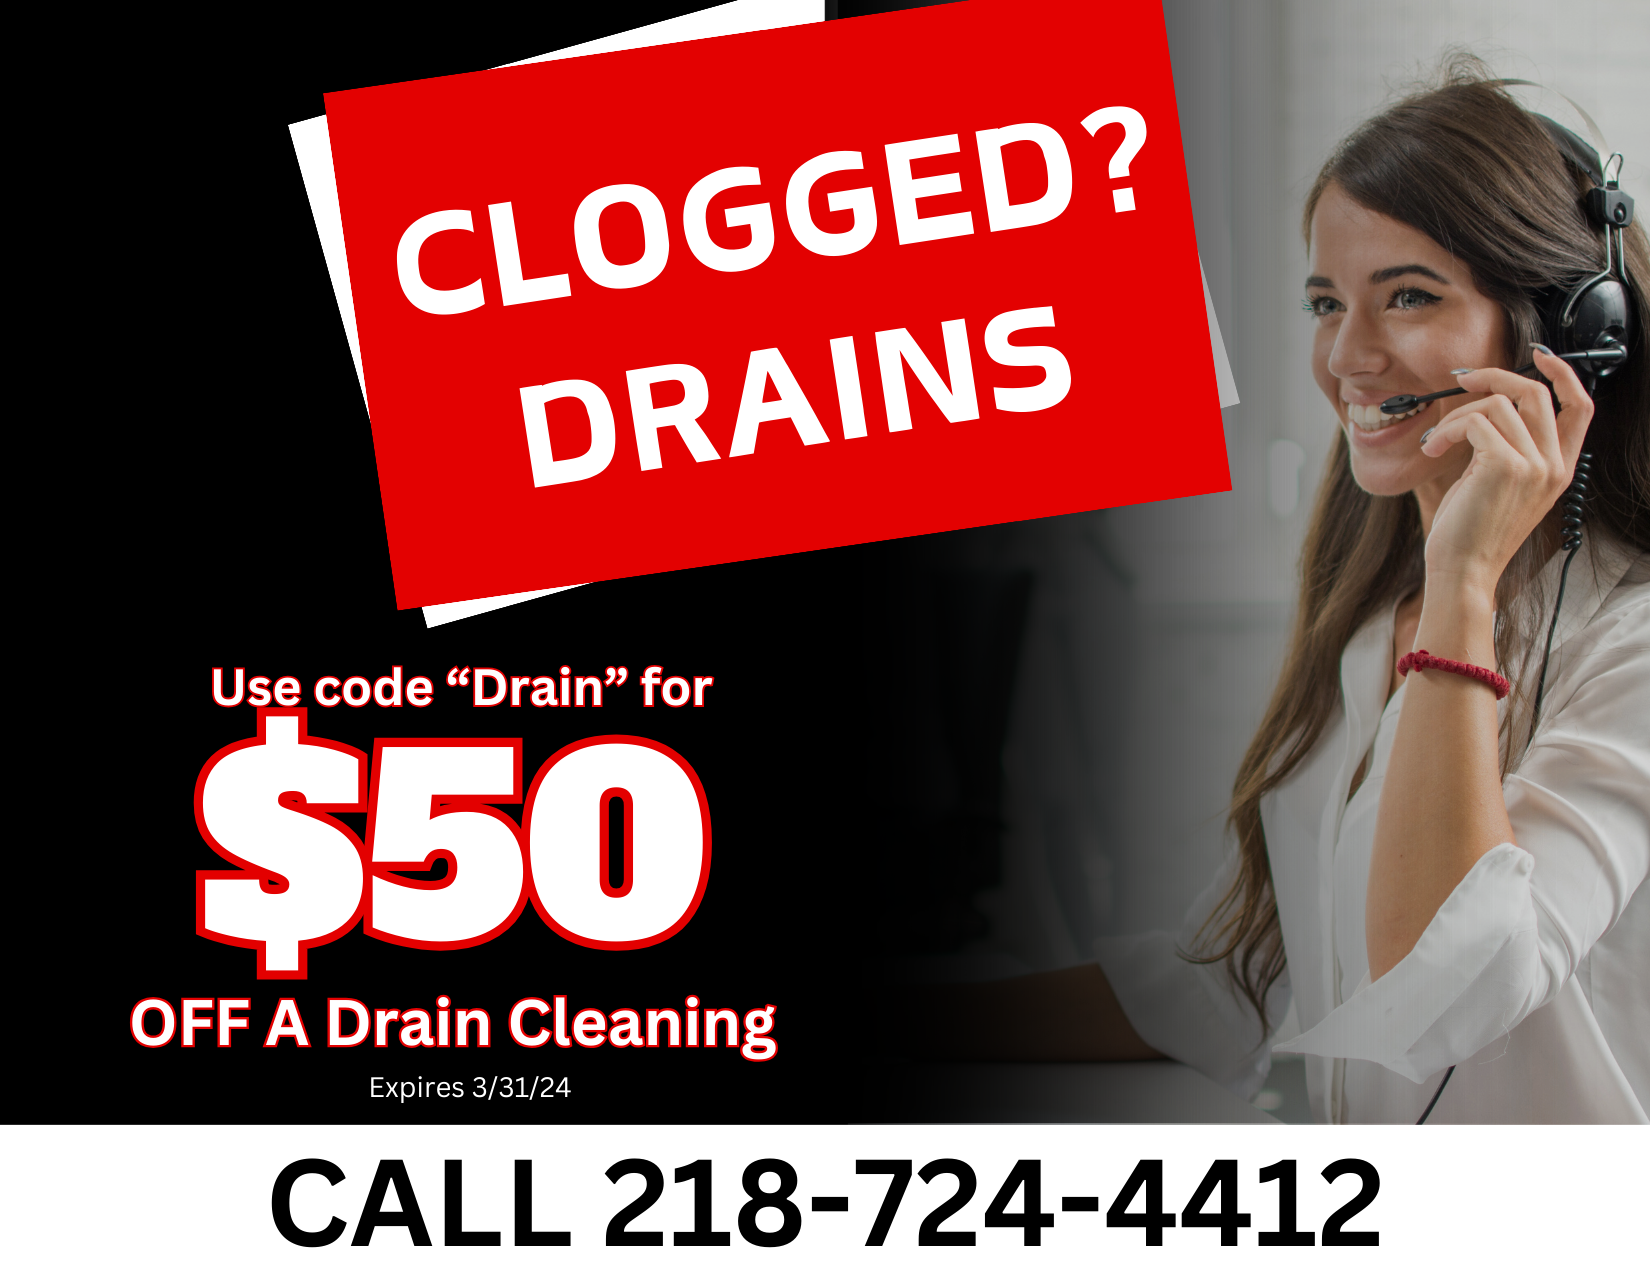 50 dollar coupon for drain cleaning service using code word Drain.